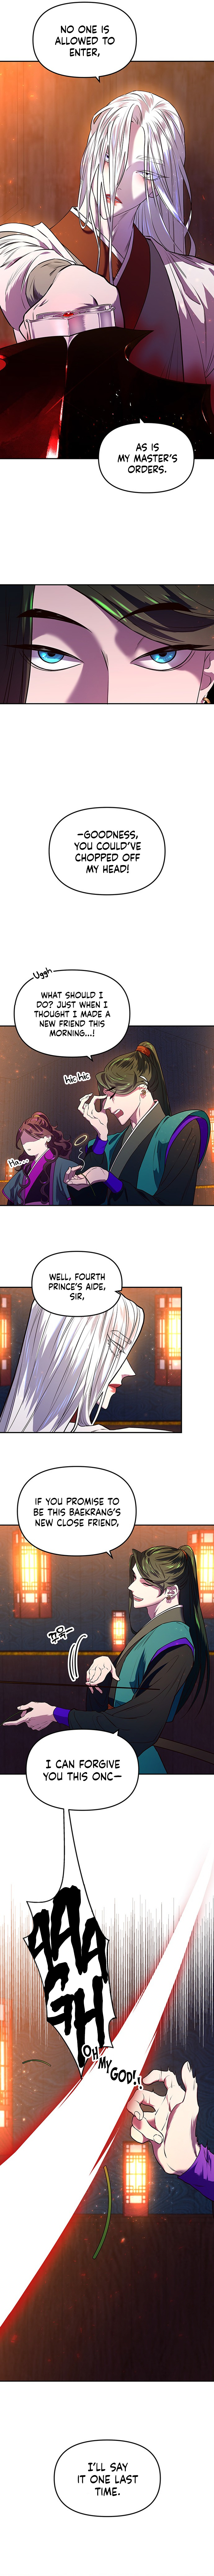 The Prince Of Myeolyeong - Page 2